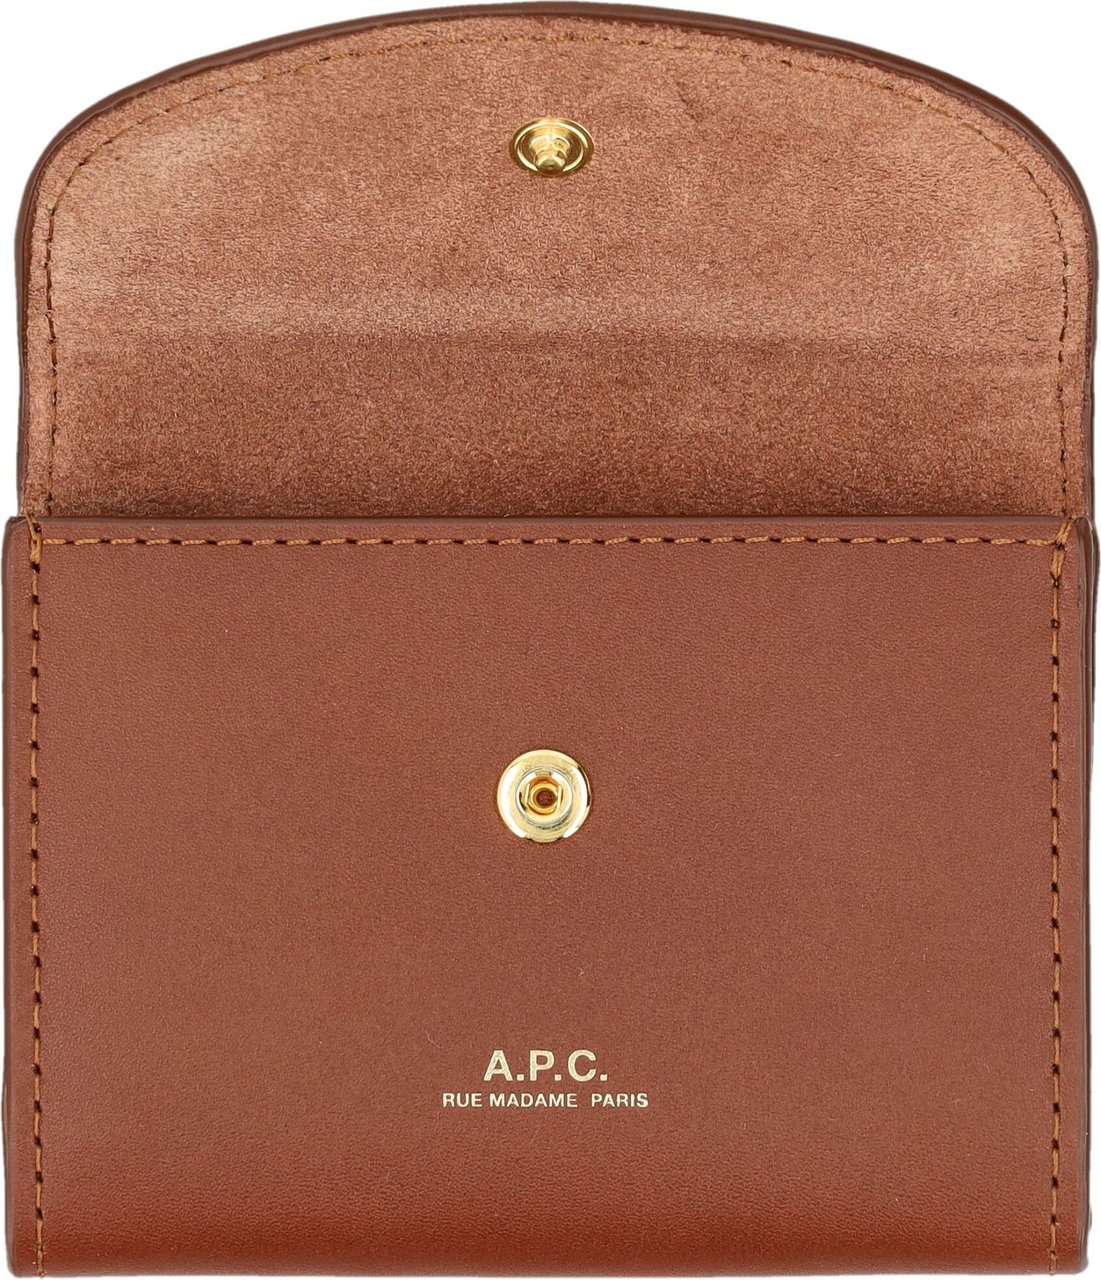 A.P.C. BUISNESS CARD HOLDER GENEVE Wit